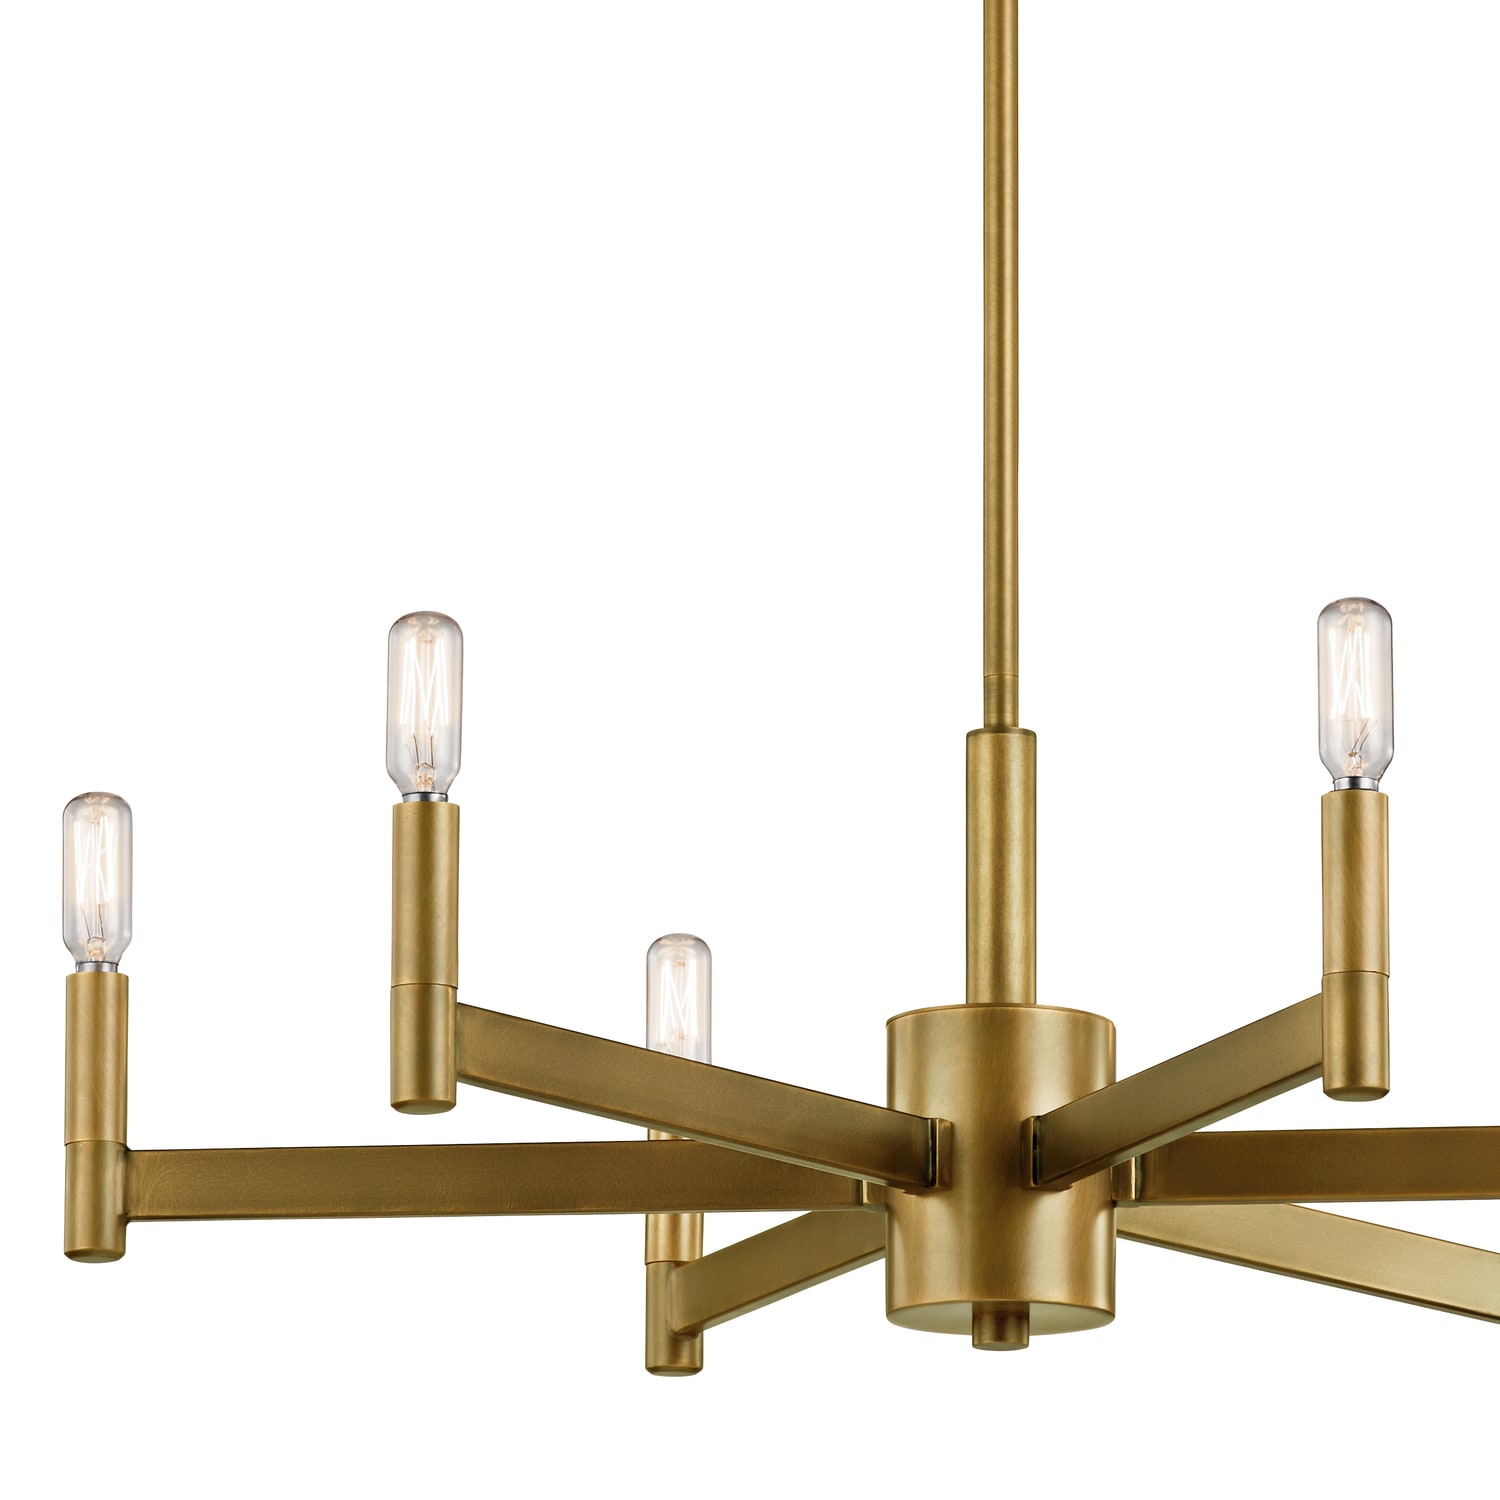 Kichler Erzo 8-Light Natural Brass Modern/Contemporary Dry rated